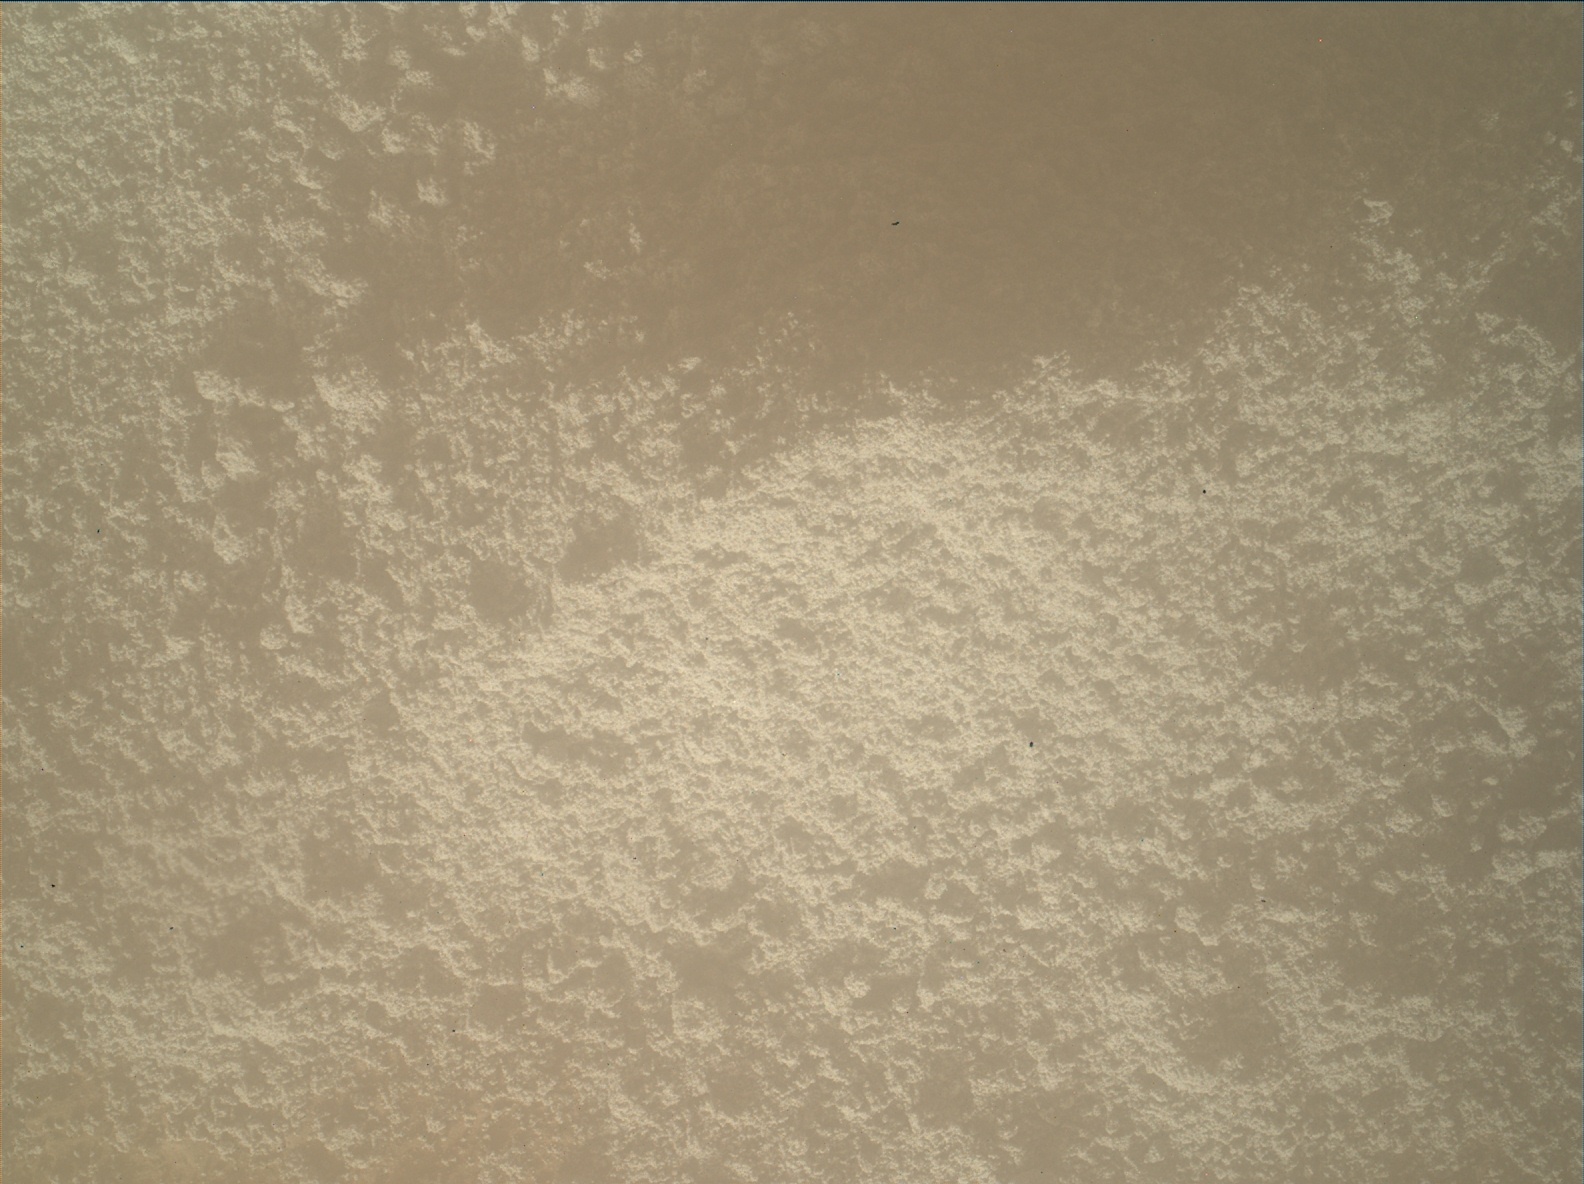 Nasa's Mars rover Curiosity acquired this image using its Mars Hand Lens Imager (MAHLI) on Sol 1204